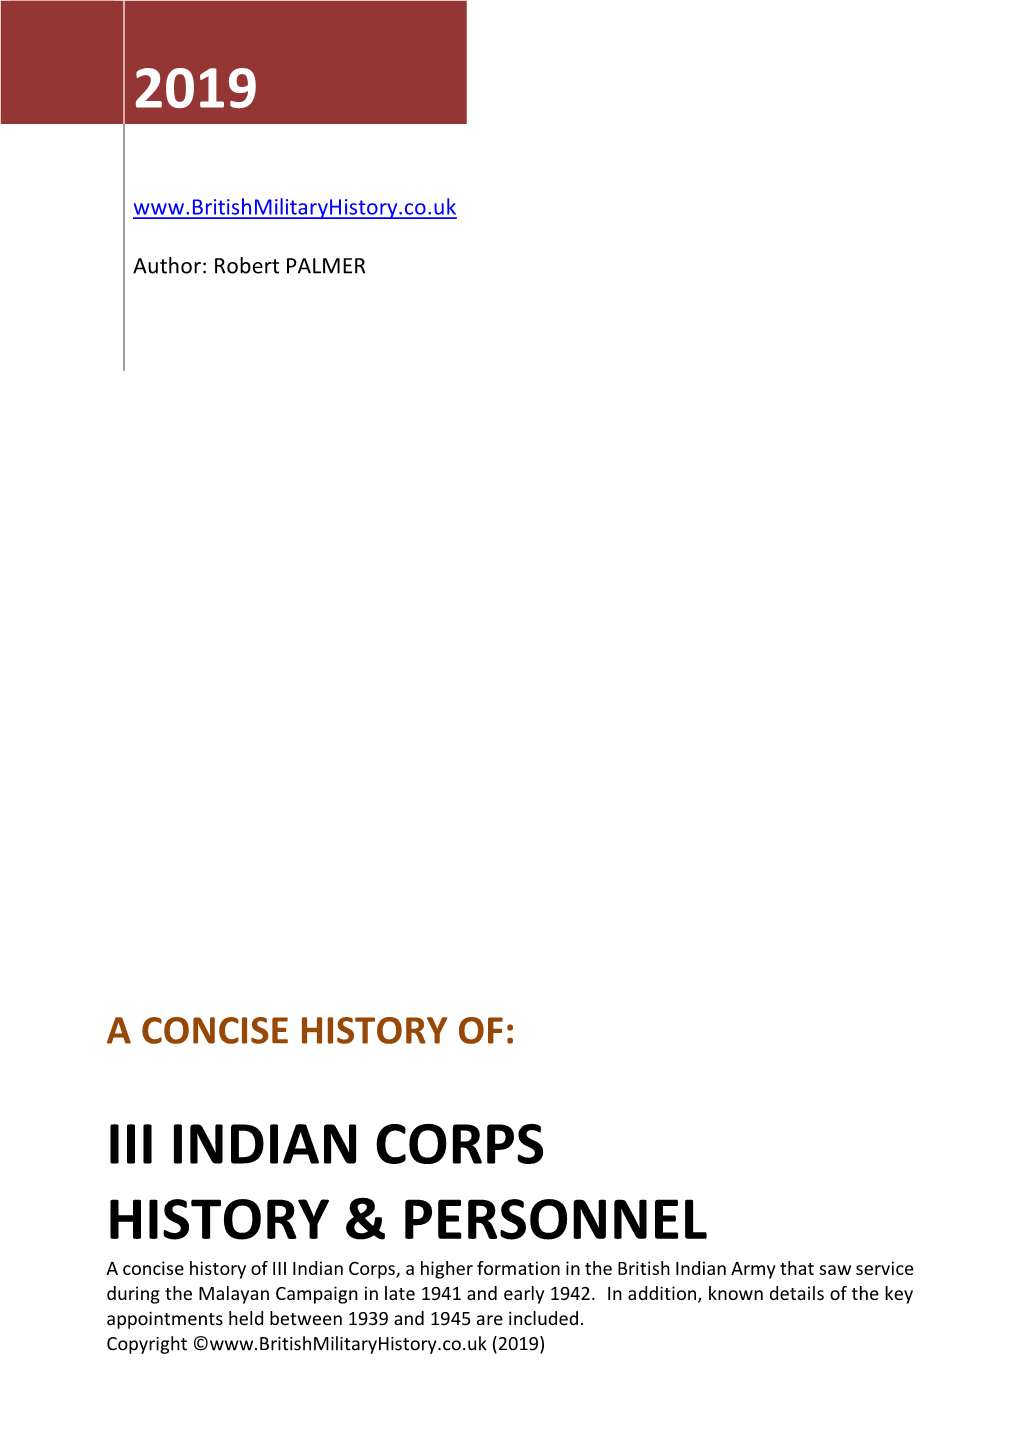 III Indian Corps History & Personnel